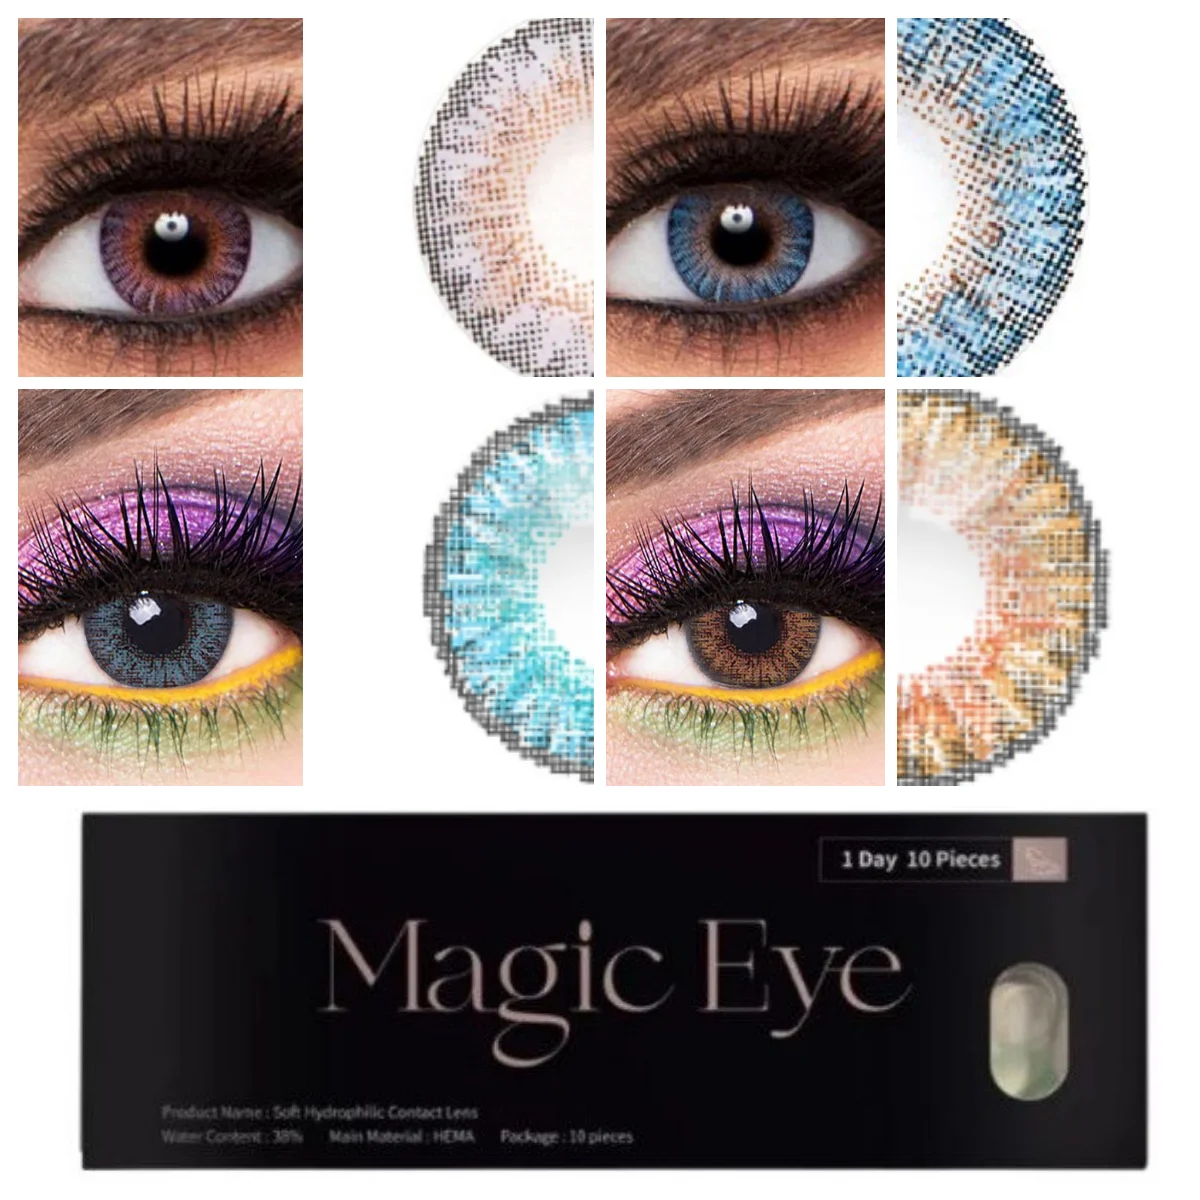 

10piece/5pairs Oneday one pair of eyes are natural colored contact lenses multi-colored contact lenses, soft and beautiful eye m